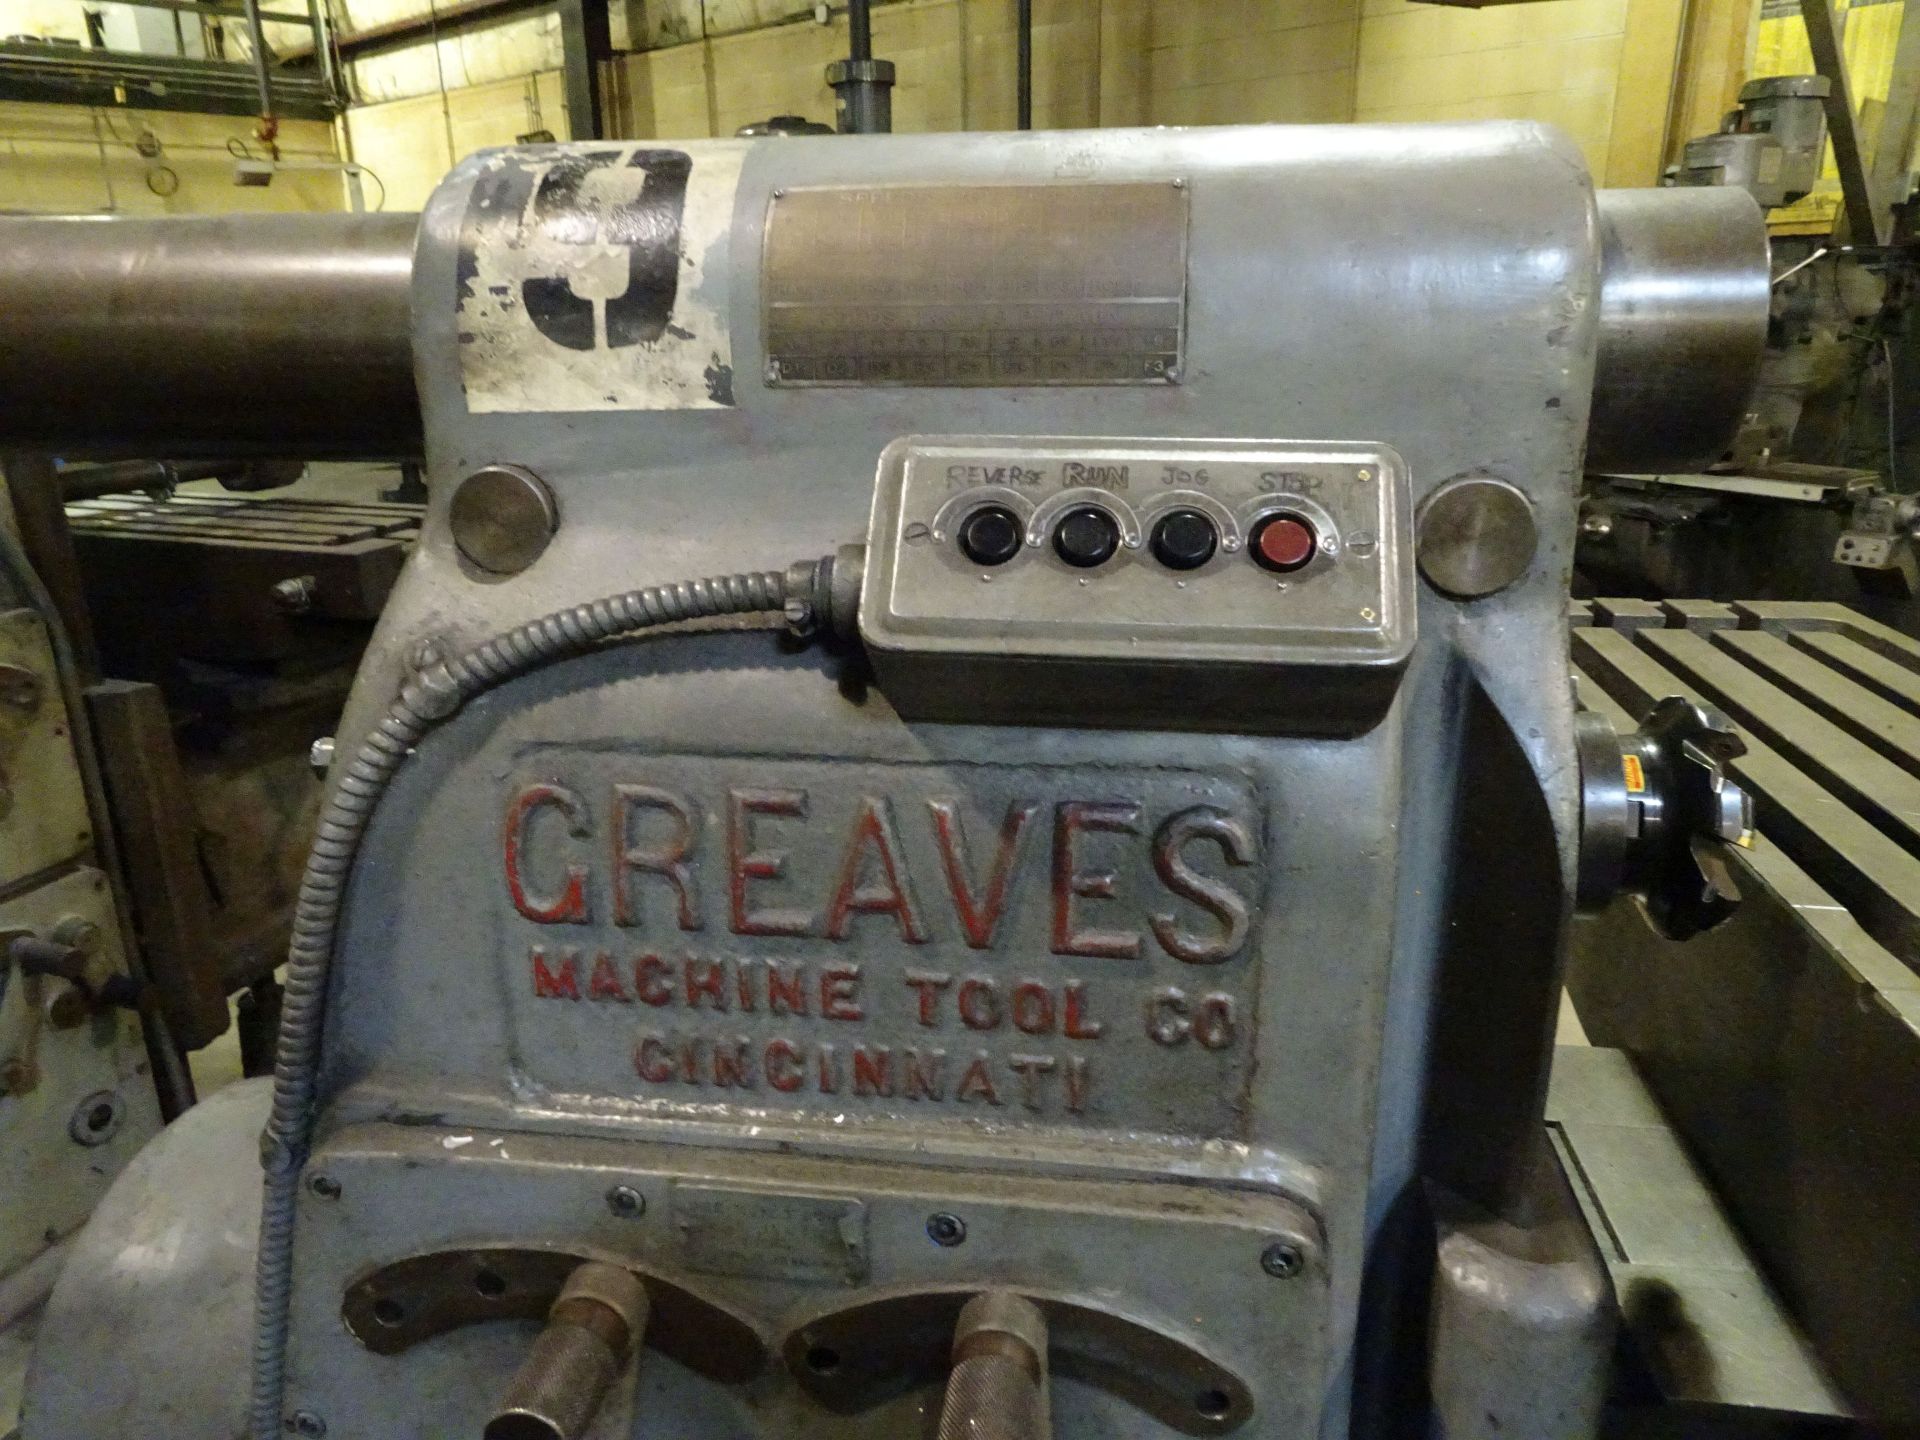 GREAVES HORIZONTAL MILLING MACHINE, SPINDLE SPEED 20-1,000 RPM, 12" X 52" TABLE - Image 3 of 7